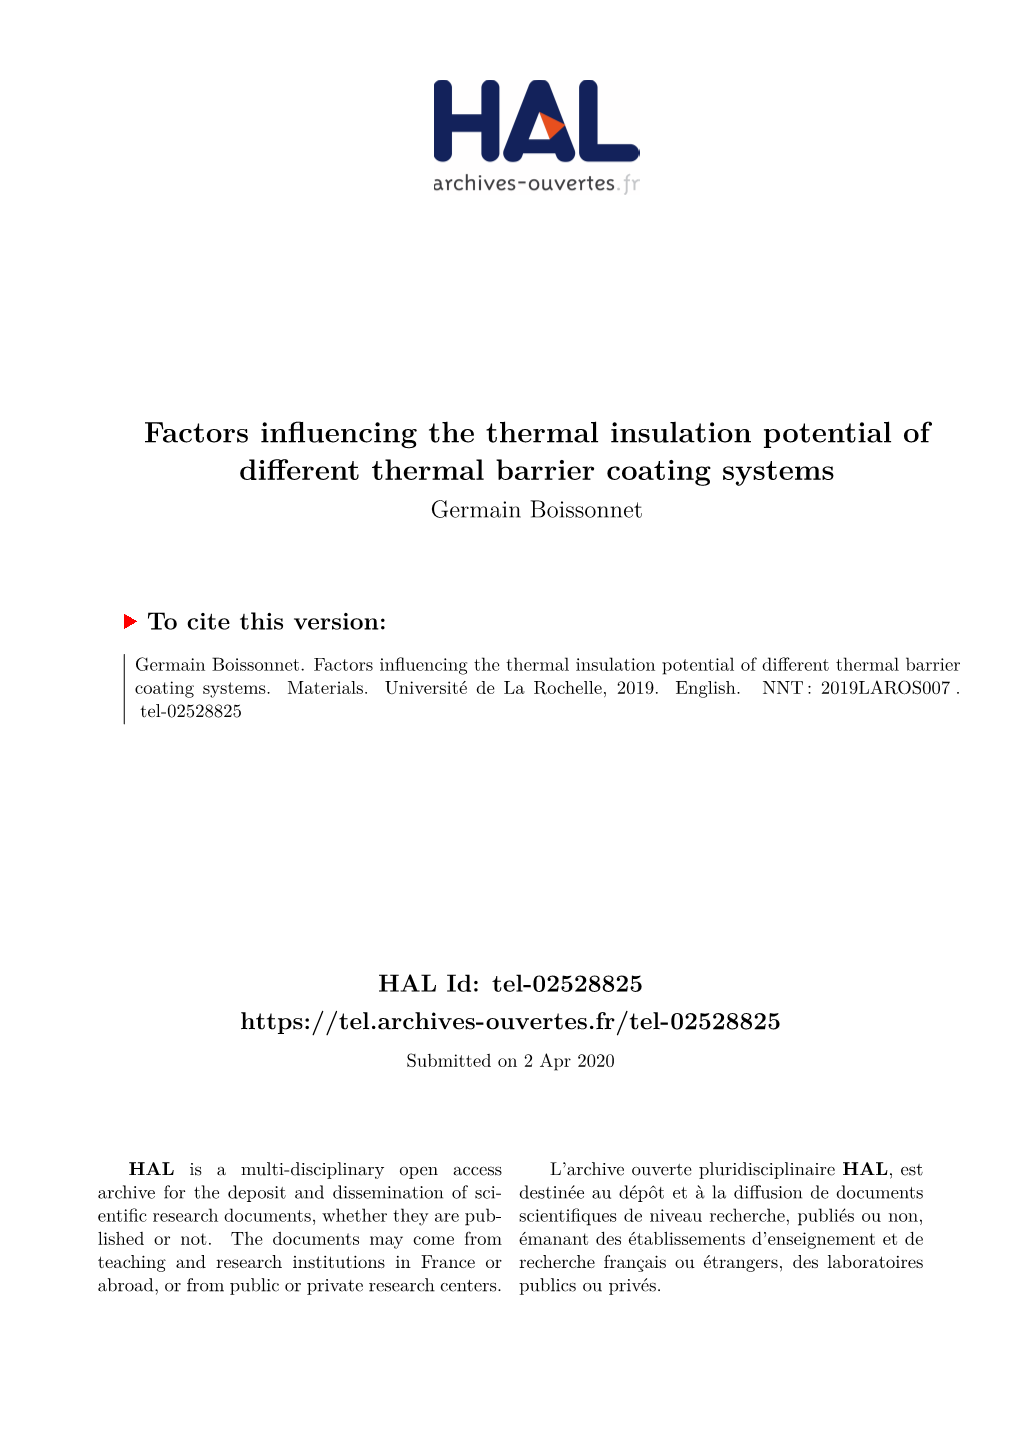 Factors Influencing the Thermal Insulation Potential of Different Thermal Barrier Coating Systems Germain Boissonnet